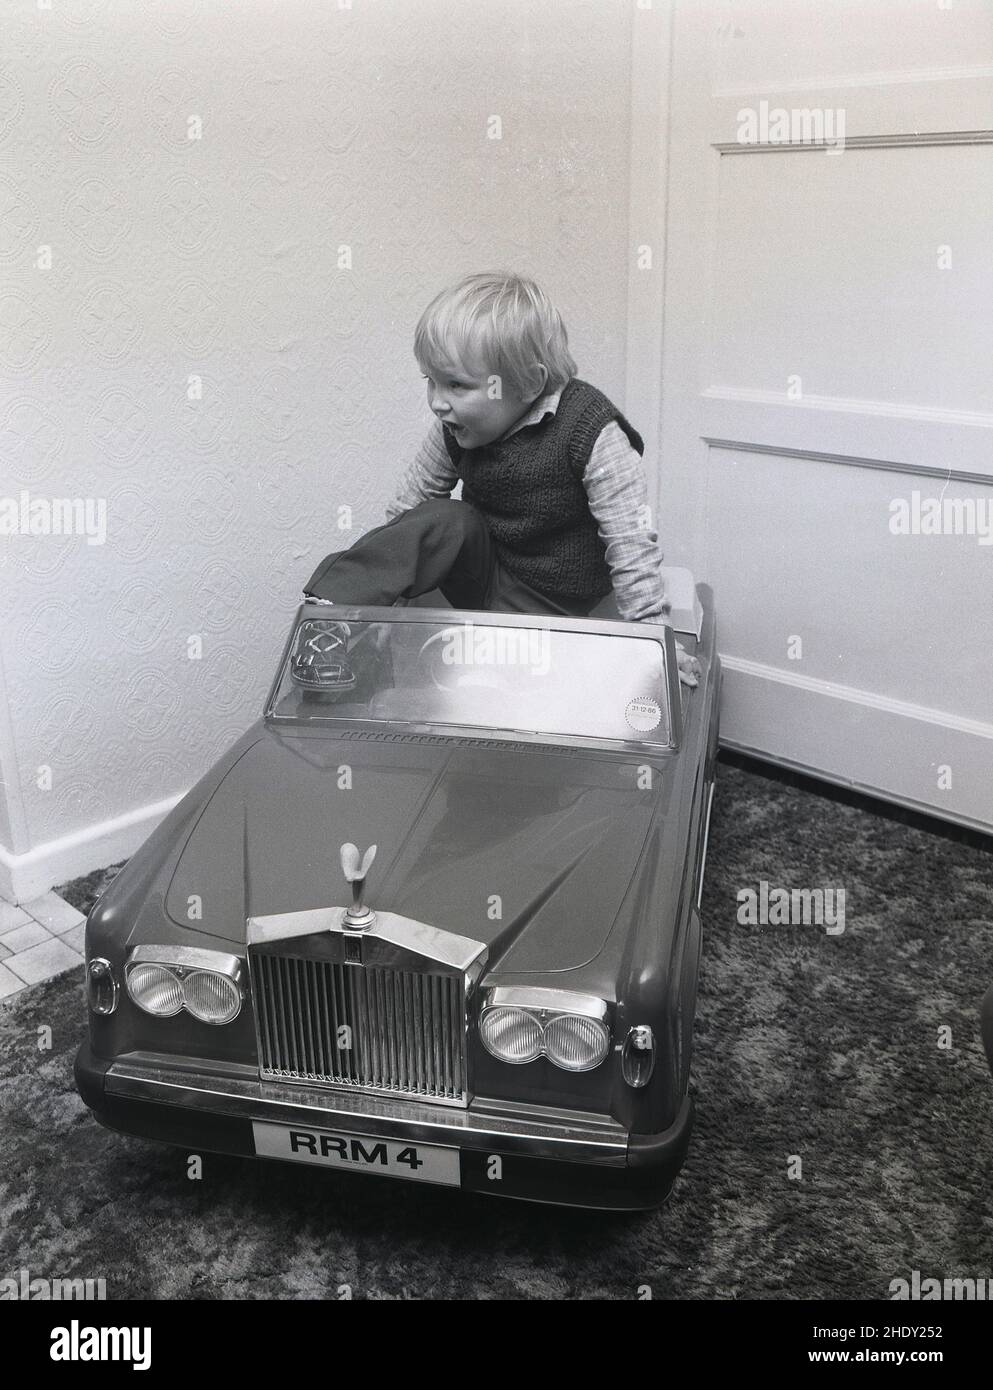 1980s, historical, inside a room, a little boy climbing into the seat of his ride-on toy car, a Rolls Royce Corniche with personalised numberplate RRM 4, England, UK. This classic child's pedal car was made by Triang, a leading British toy maker of the day. It had a moulded plastic body on a steel frame and an electric motor. As a young boy, Prince WIlliam had one given to him by Harrod's, the famous store in London's Knightsbridge which originally sold them. Stock Photo